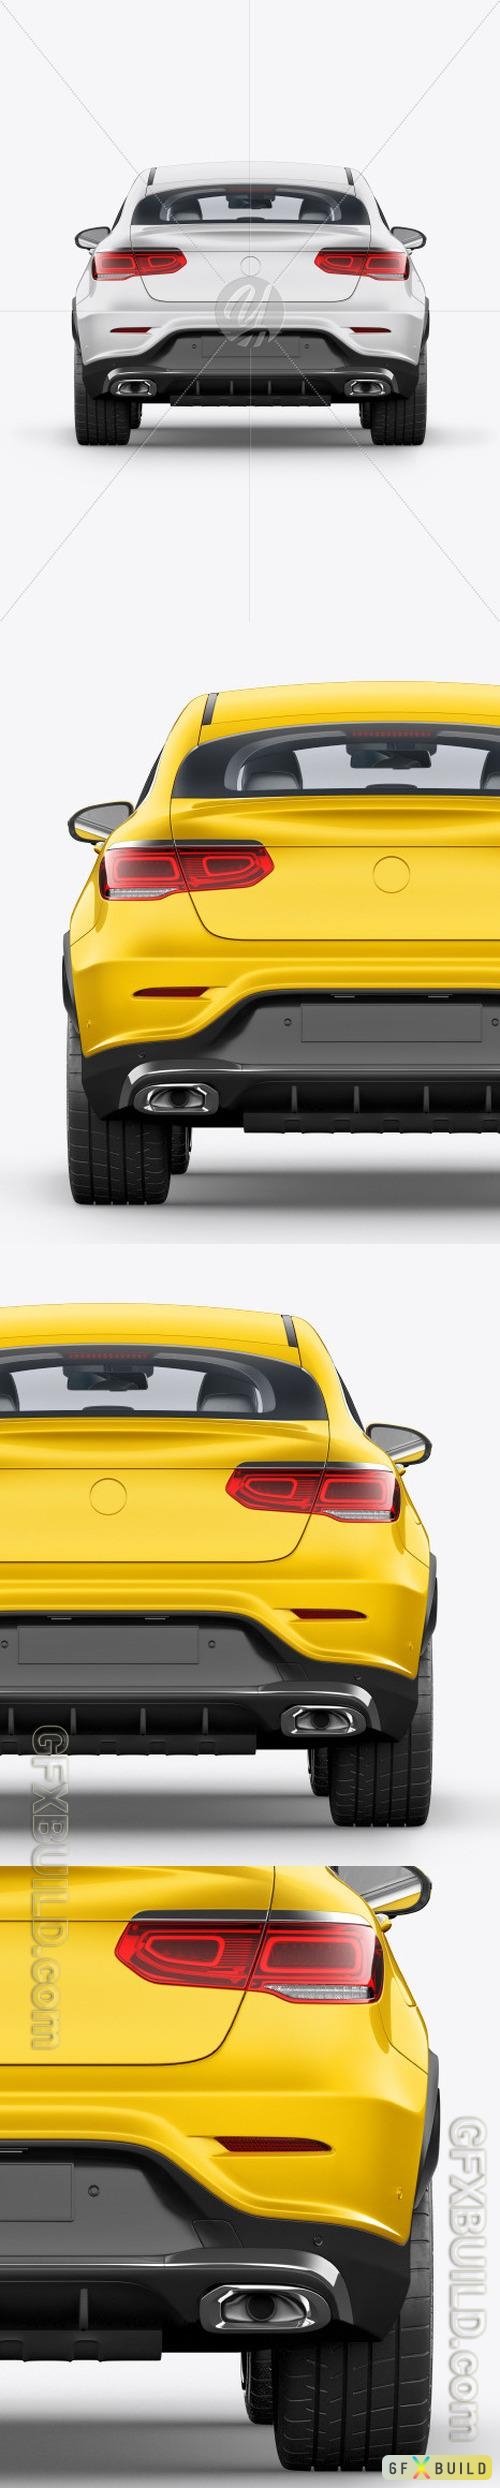 Coupe Crossover SUV Mockup - Back View 48146